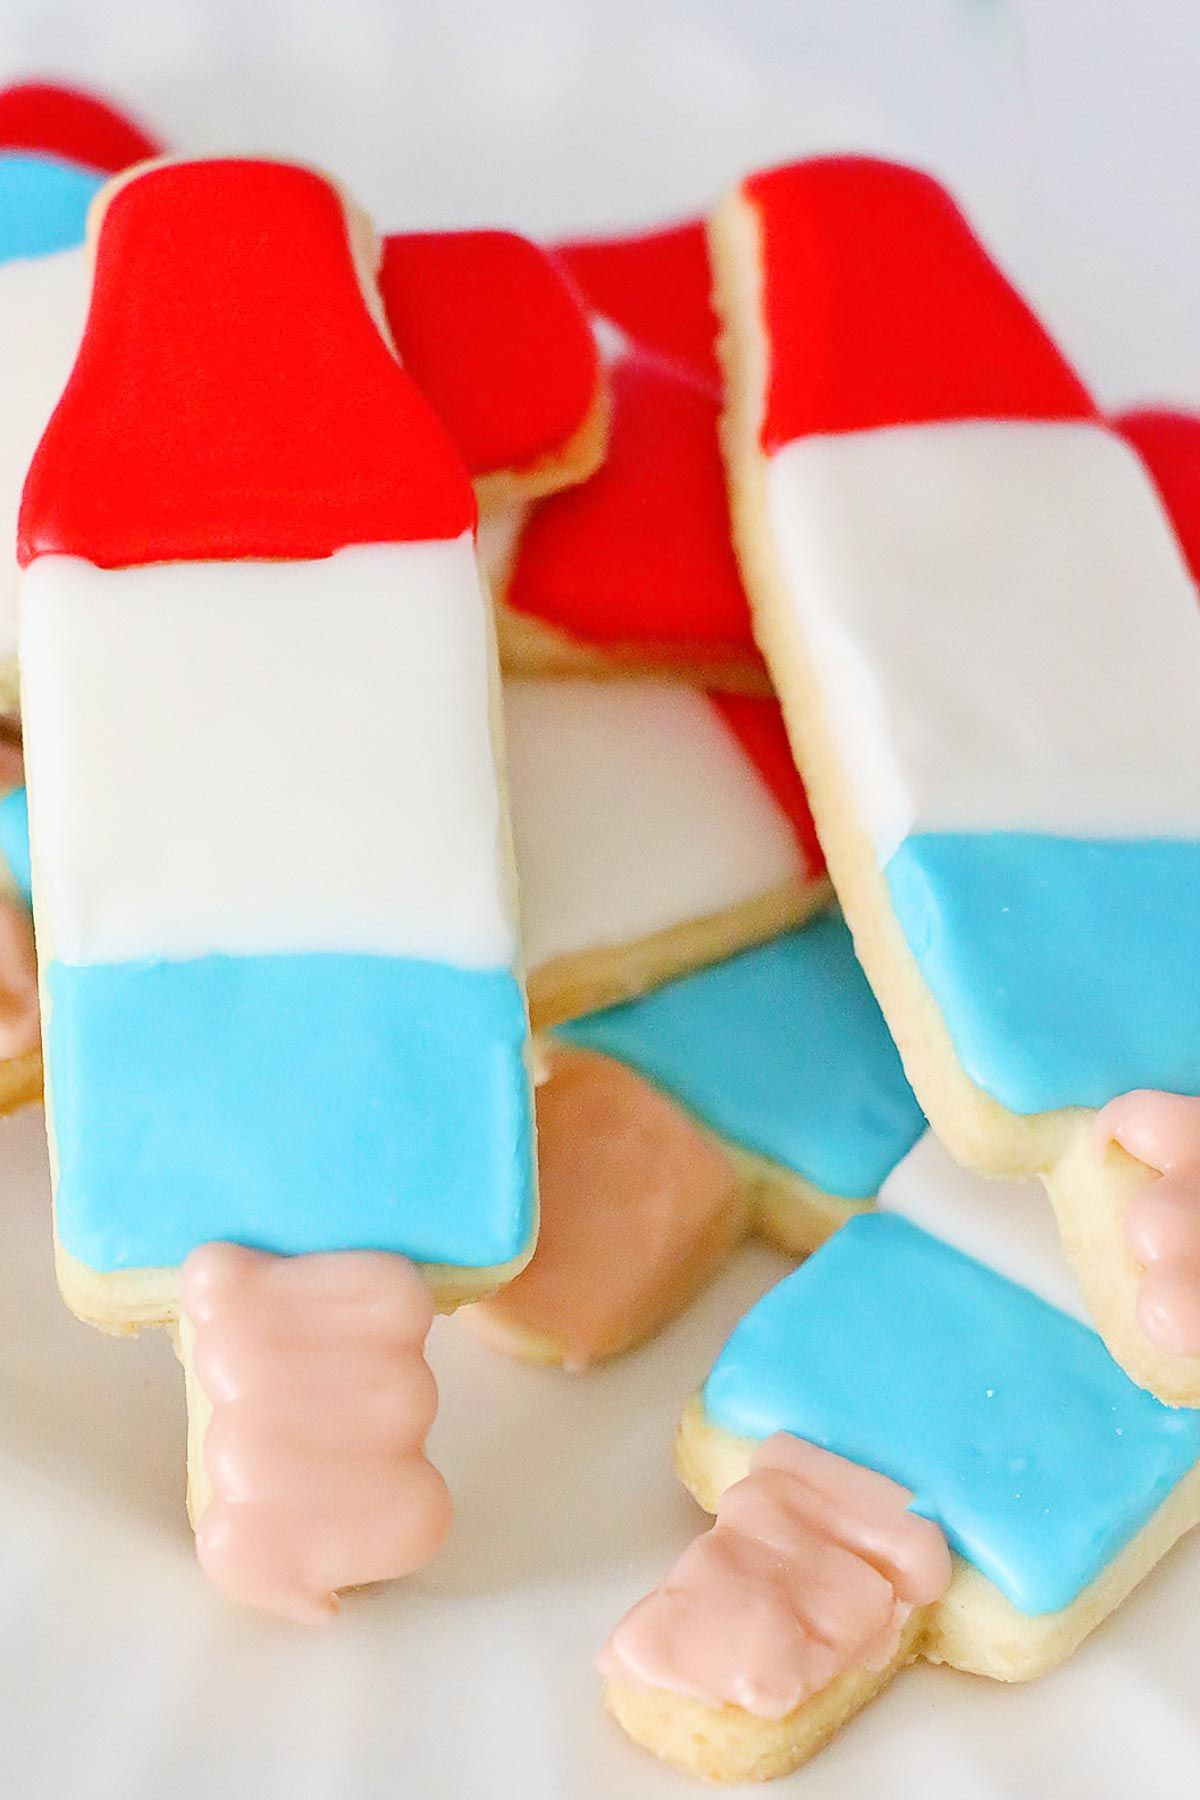 Bomb pop 4th of July sugar cookies on a white plate